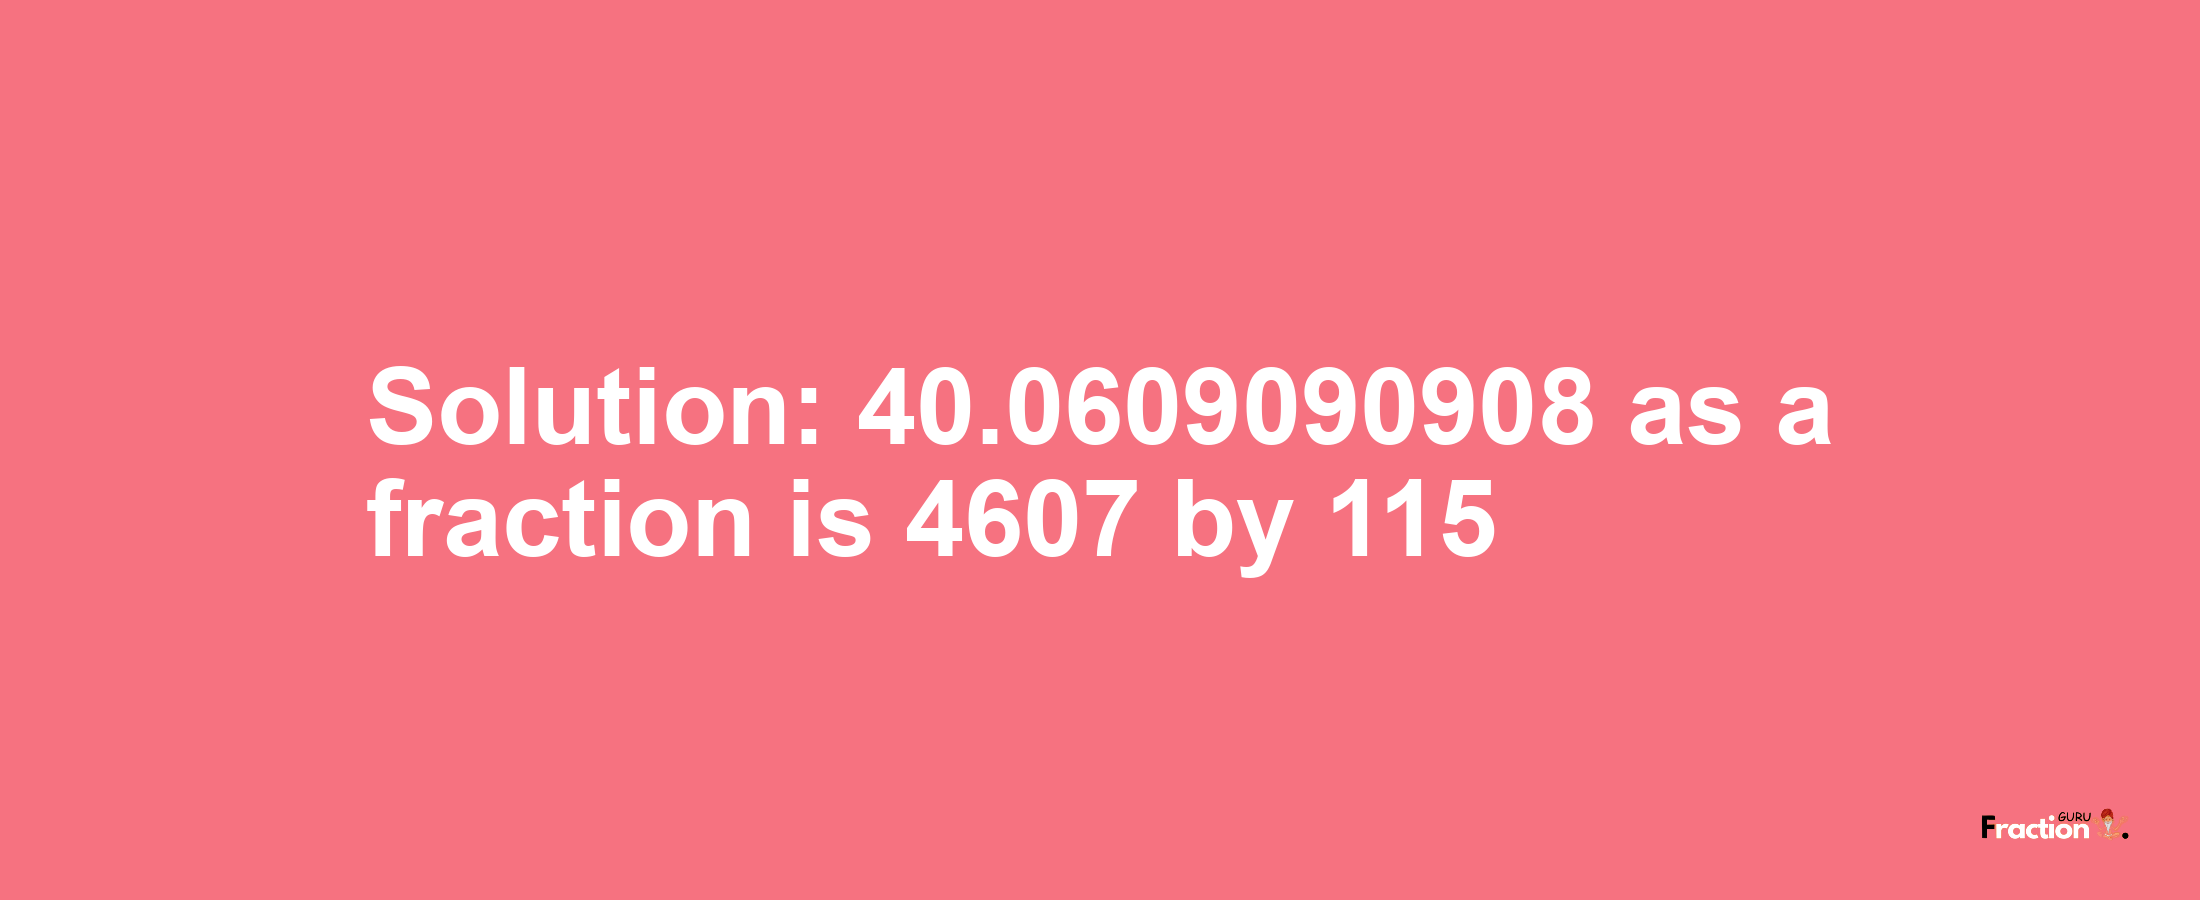 Solution:40.0609090908 as a fraction is 4607/115